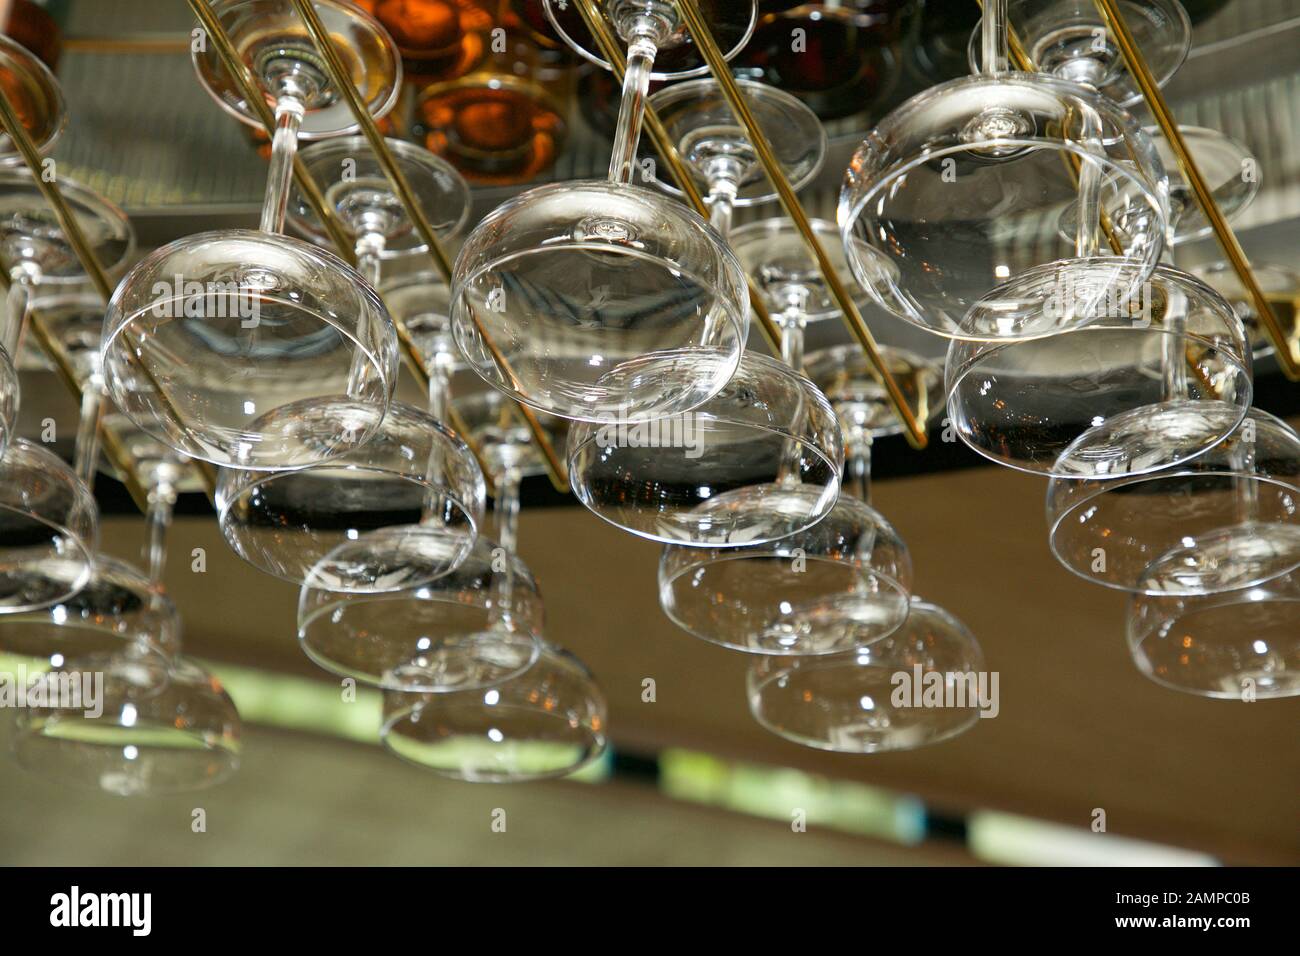 Drinking glasses hanging from a rack in a bar or restaurant. Stock Photo